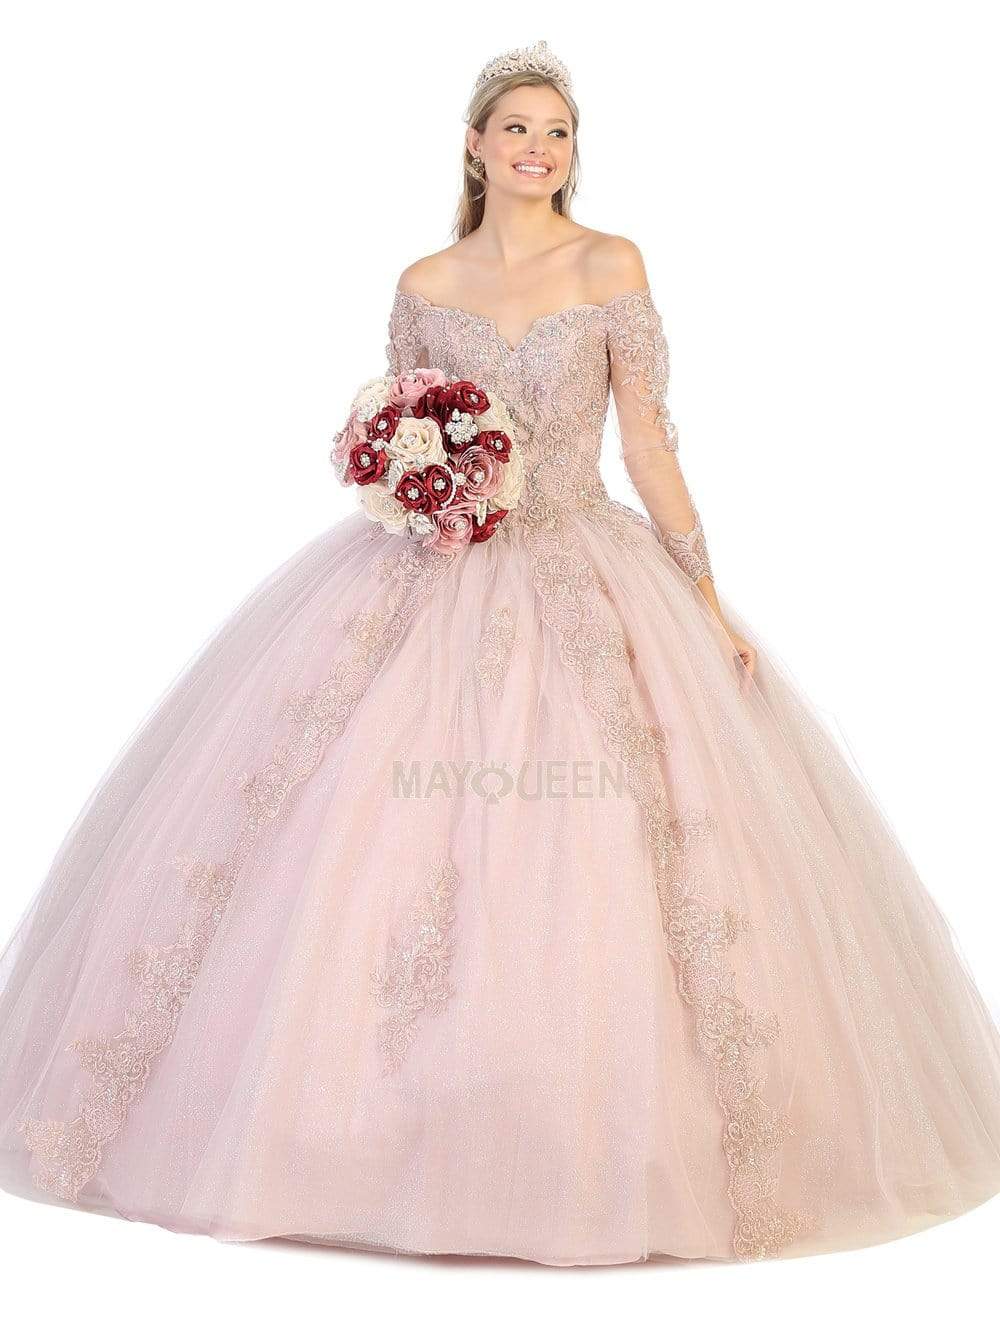 May Queen - LK135 Off Shoulder Embroidered Glitter Ballgown Quinceanera Dresses 4 / Mauve